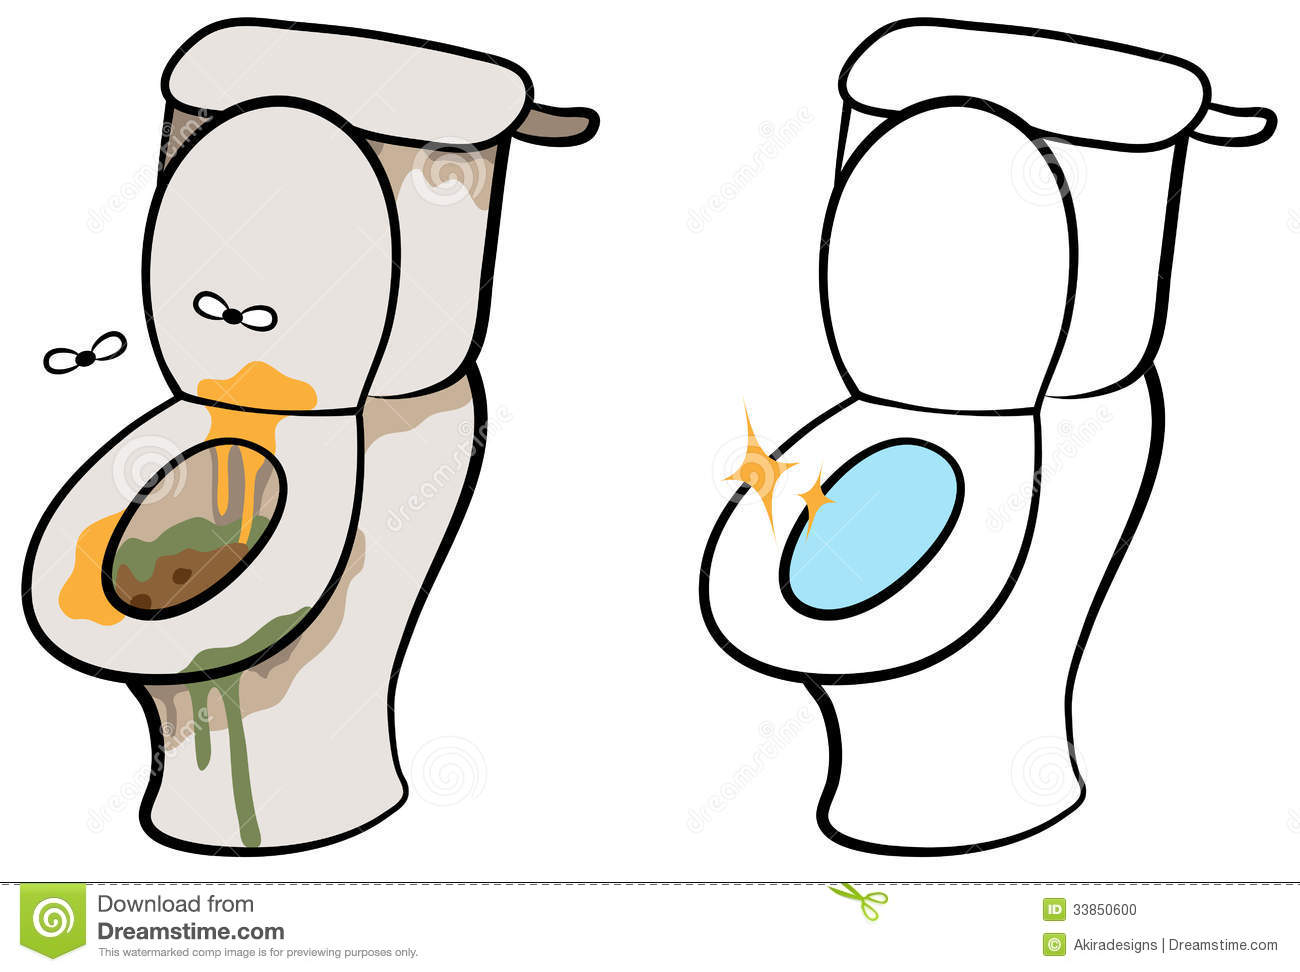 Illustration Of Dirty And Smelly Toilet And Clean Hygienic Toilet